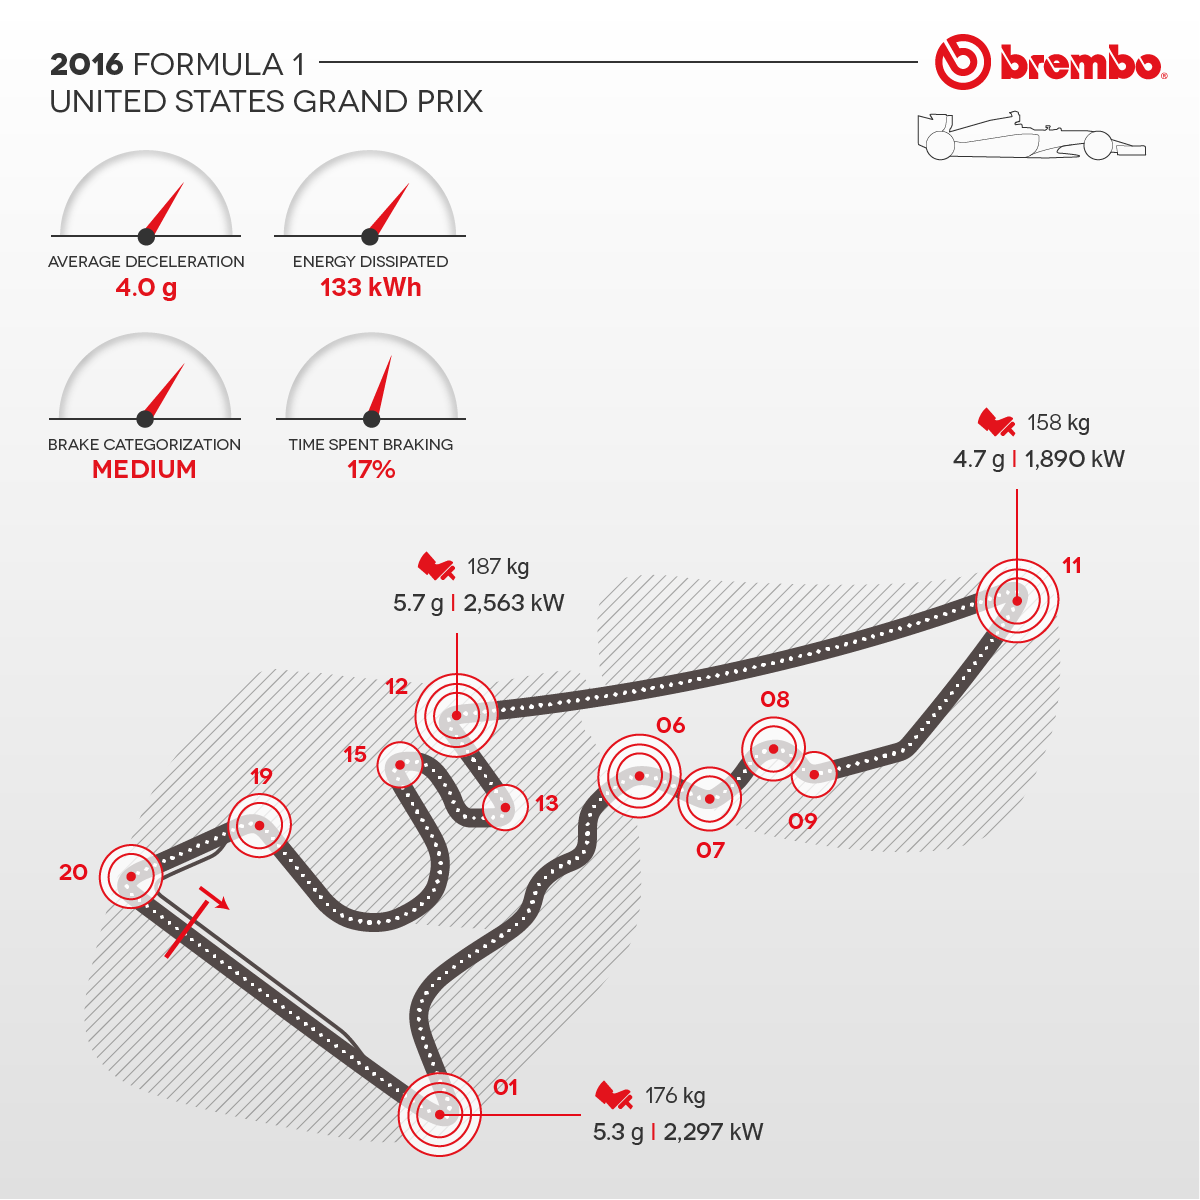 Detailed representation of the 2016 United States GP with curves detail Brembo